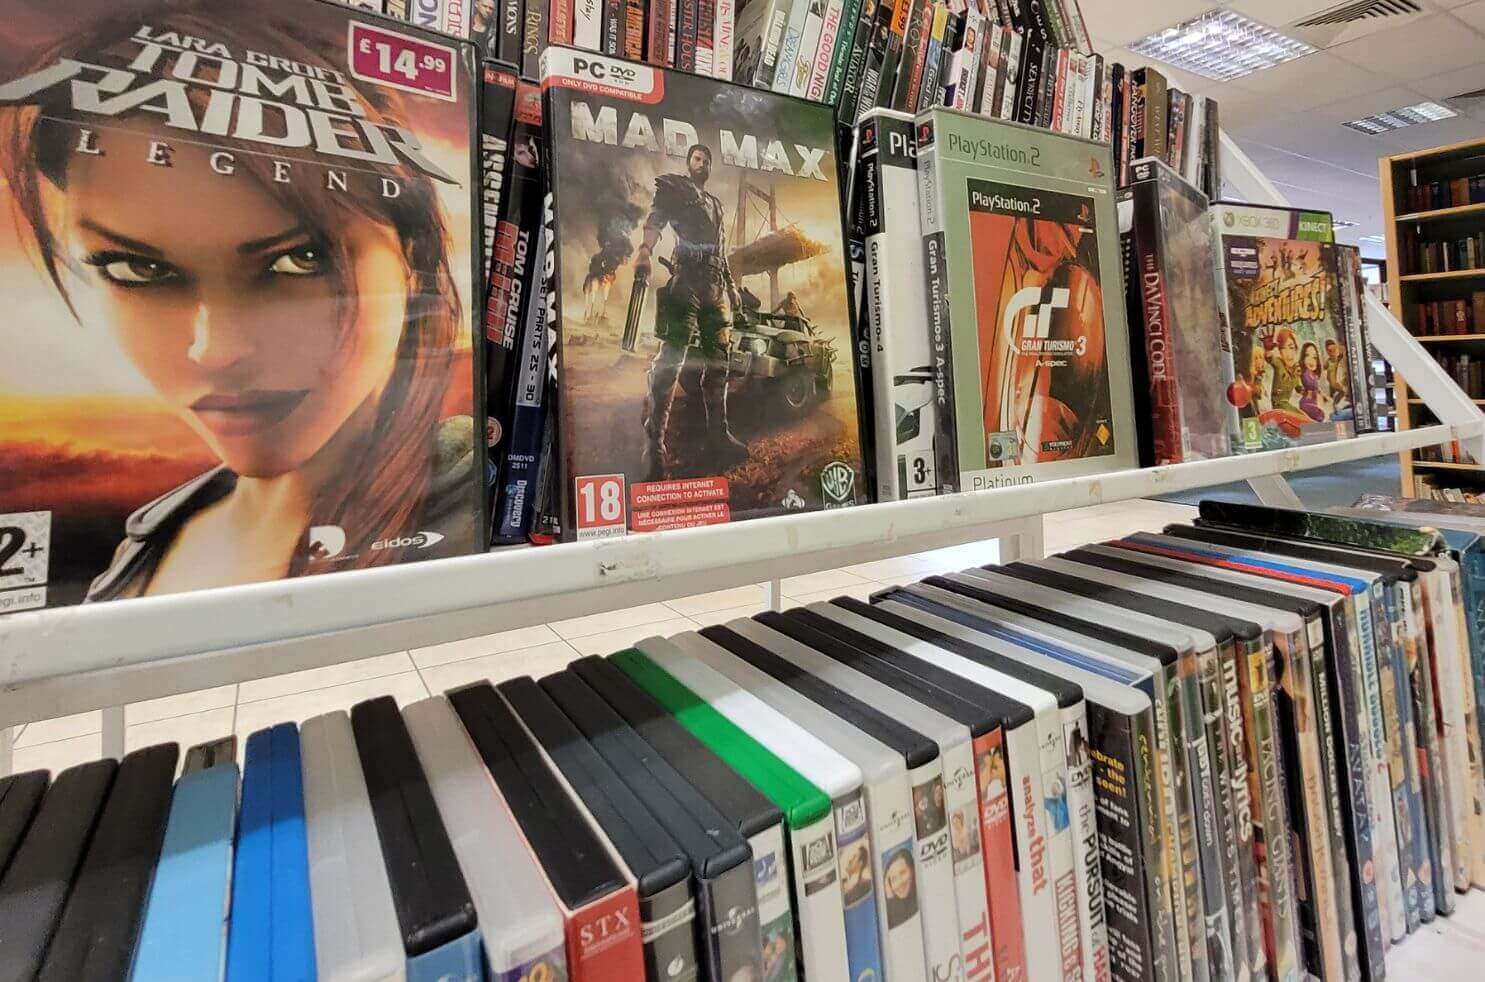 Danielle's top five preloved console games on the shelf of the top floor of Emmaus Department Store